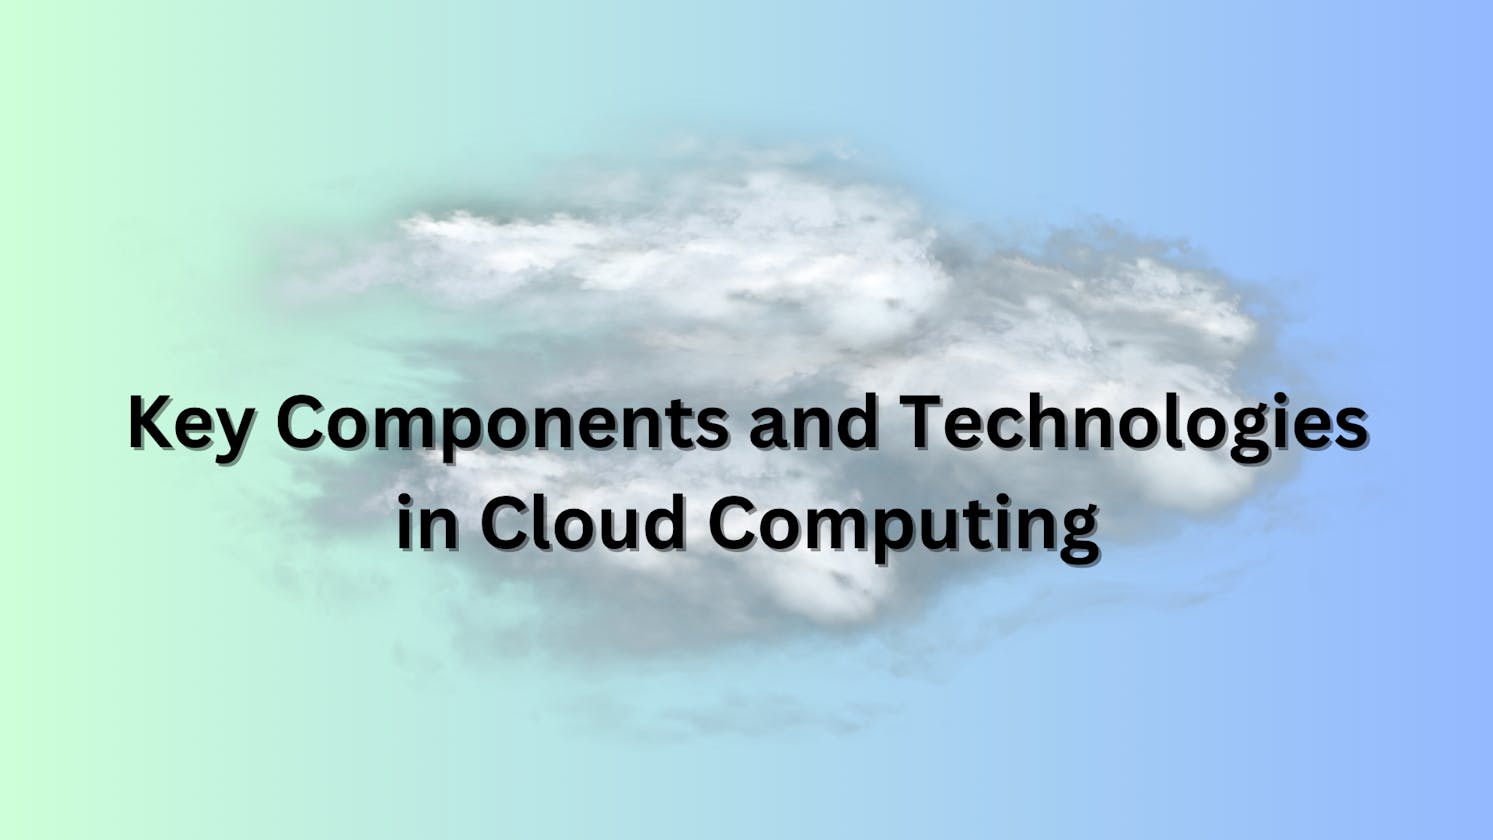 Key Components and Technologies in Cloud Computing